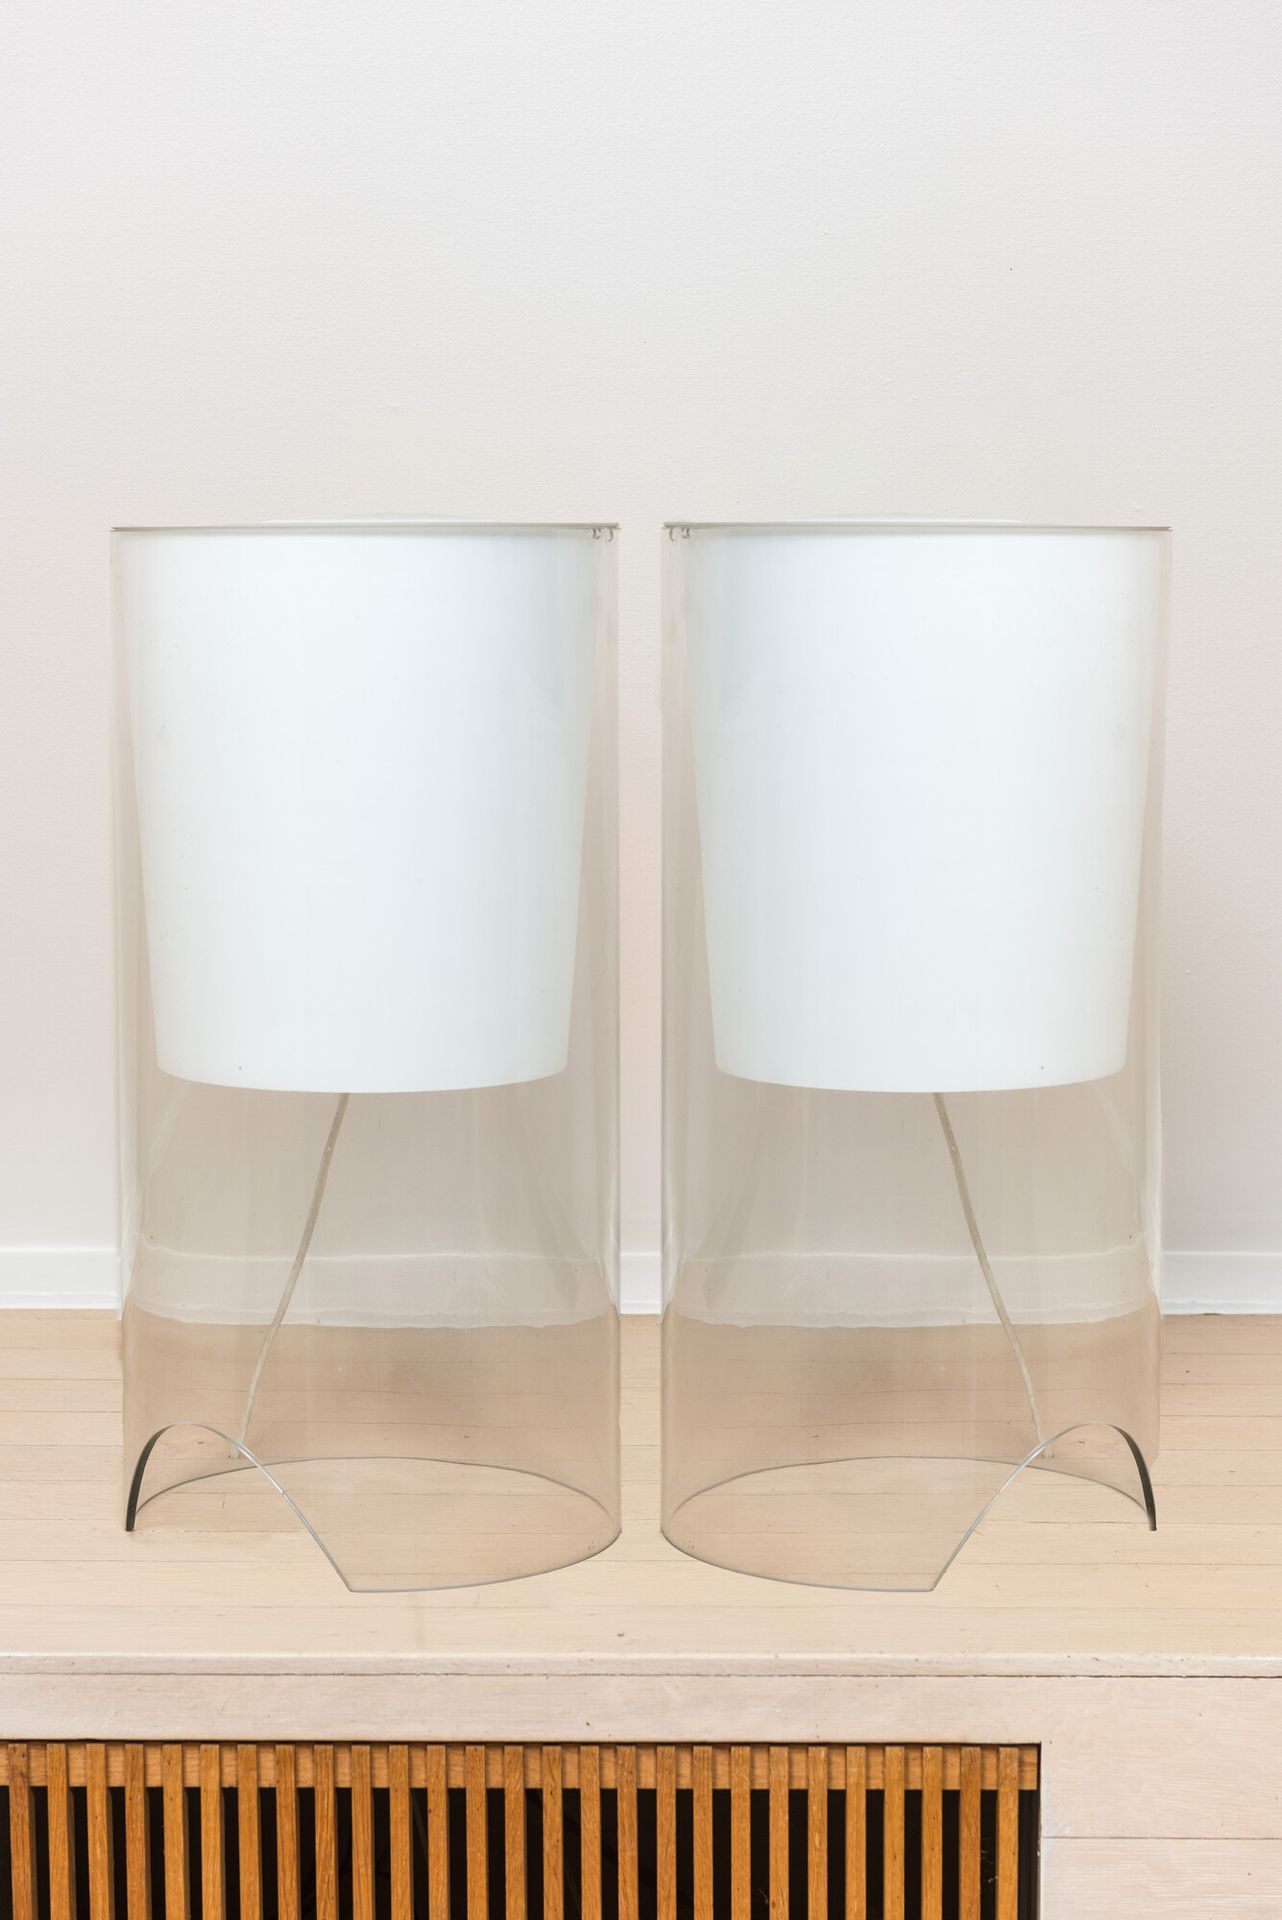 Achille Castiglioni for Flos: a pair of 'AOY' table lamps, 1975 Full title: Achi&hellip;